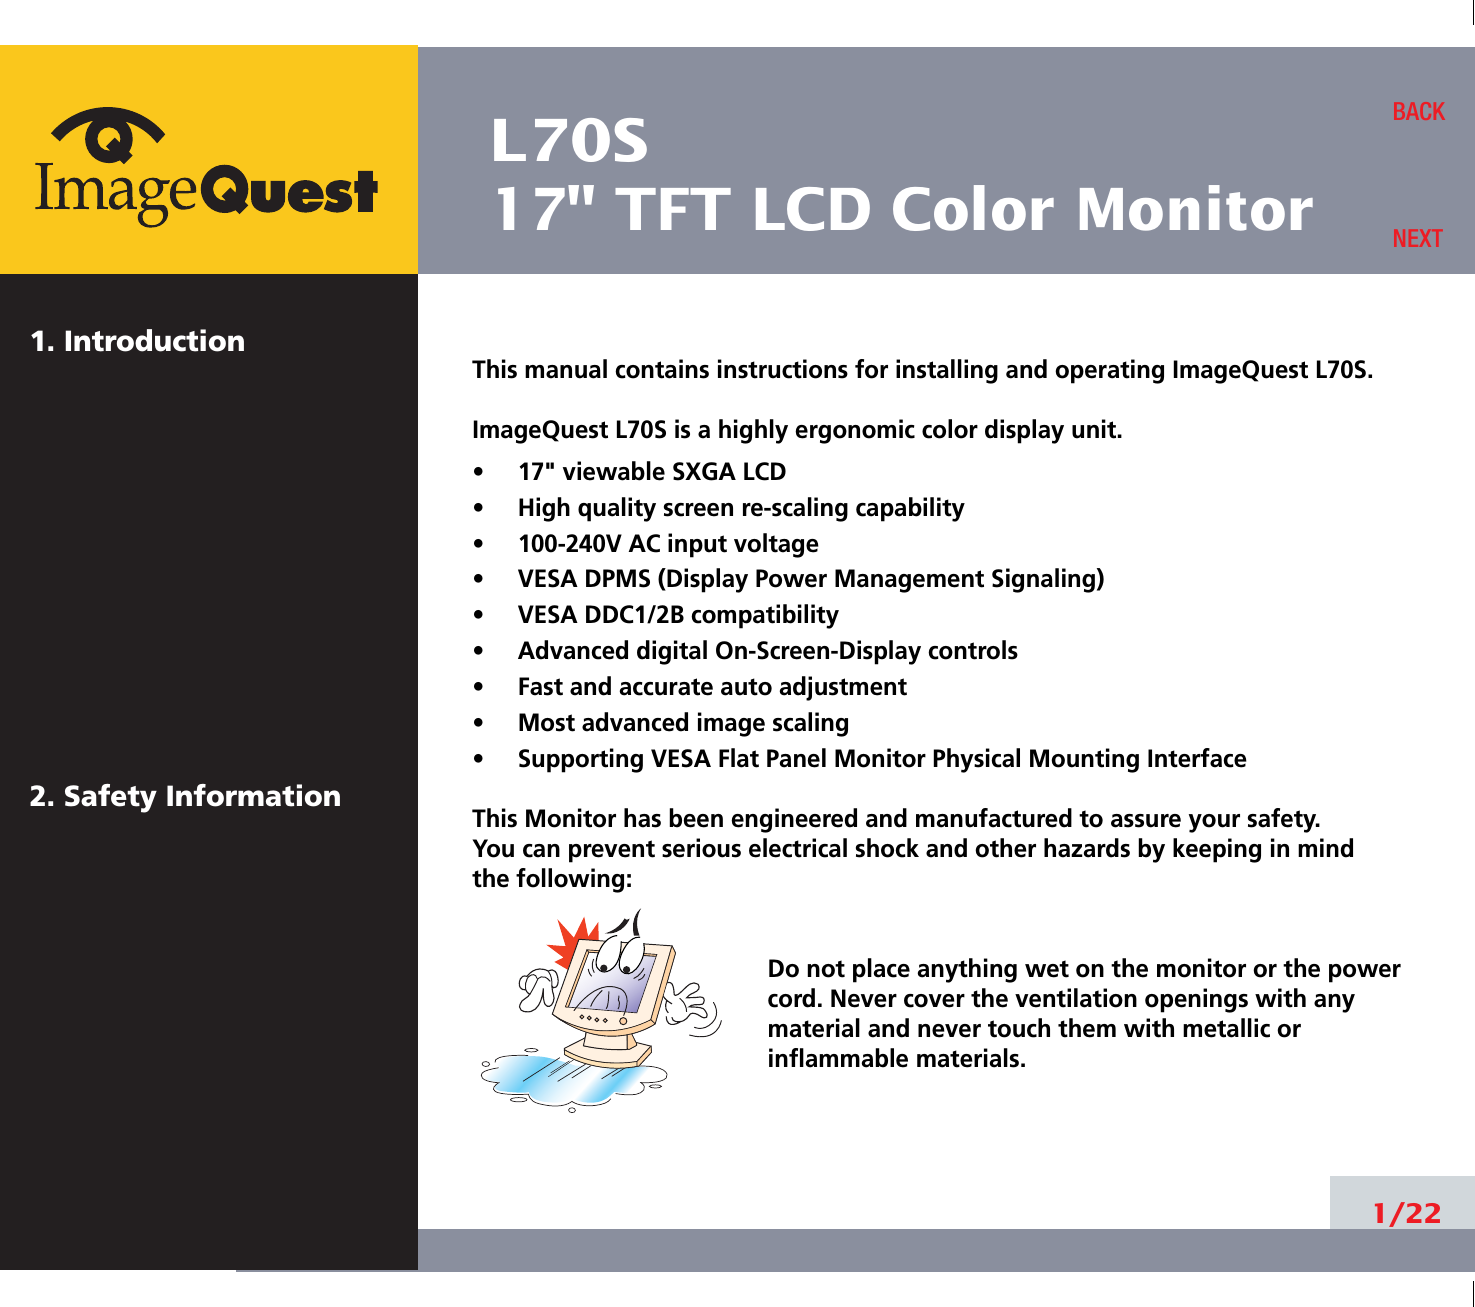 L70S17&quot; TFT LCD Color Monitor1. Introduction2. Safety Information1/22BACKNEXTThis manual contains instructions for installing and operating ImageQuest L70S.ImageQuest L70S is a highly ergonomic color display unit.•     17&quot; viewable SXGA LCD•     High quality screen re-scaling capability•     100-240V AC input voltage•     VESA DPMS (Display Power Management Signaling)•     VESA DDC1/2B compatibility•     Advanced digital On-Screen-Display controls•     Fast and accurate auto adjustment  •     Most advanced image scaling•     Supporting VESA Flat Panel Monitor Physical Mounting InterfaceThis Monitor has been engineered and manufactured to assure your safety. You can prevent serious electrical shock and other hazards by keeping in mind the following:Do not place anything wet on the monitor or the powercord. Never cover the ventilation openings with anymaterial and never touch them with metallic or inflammable materials.